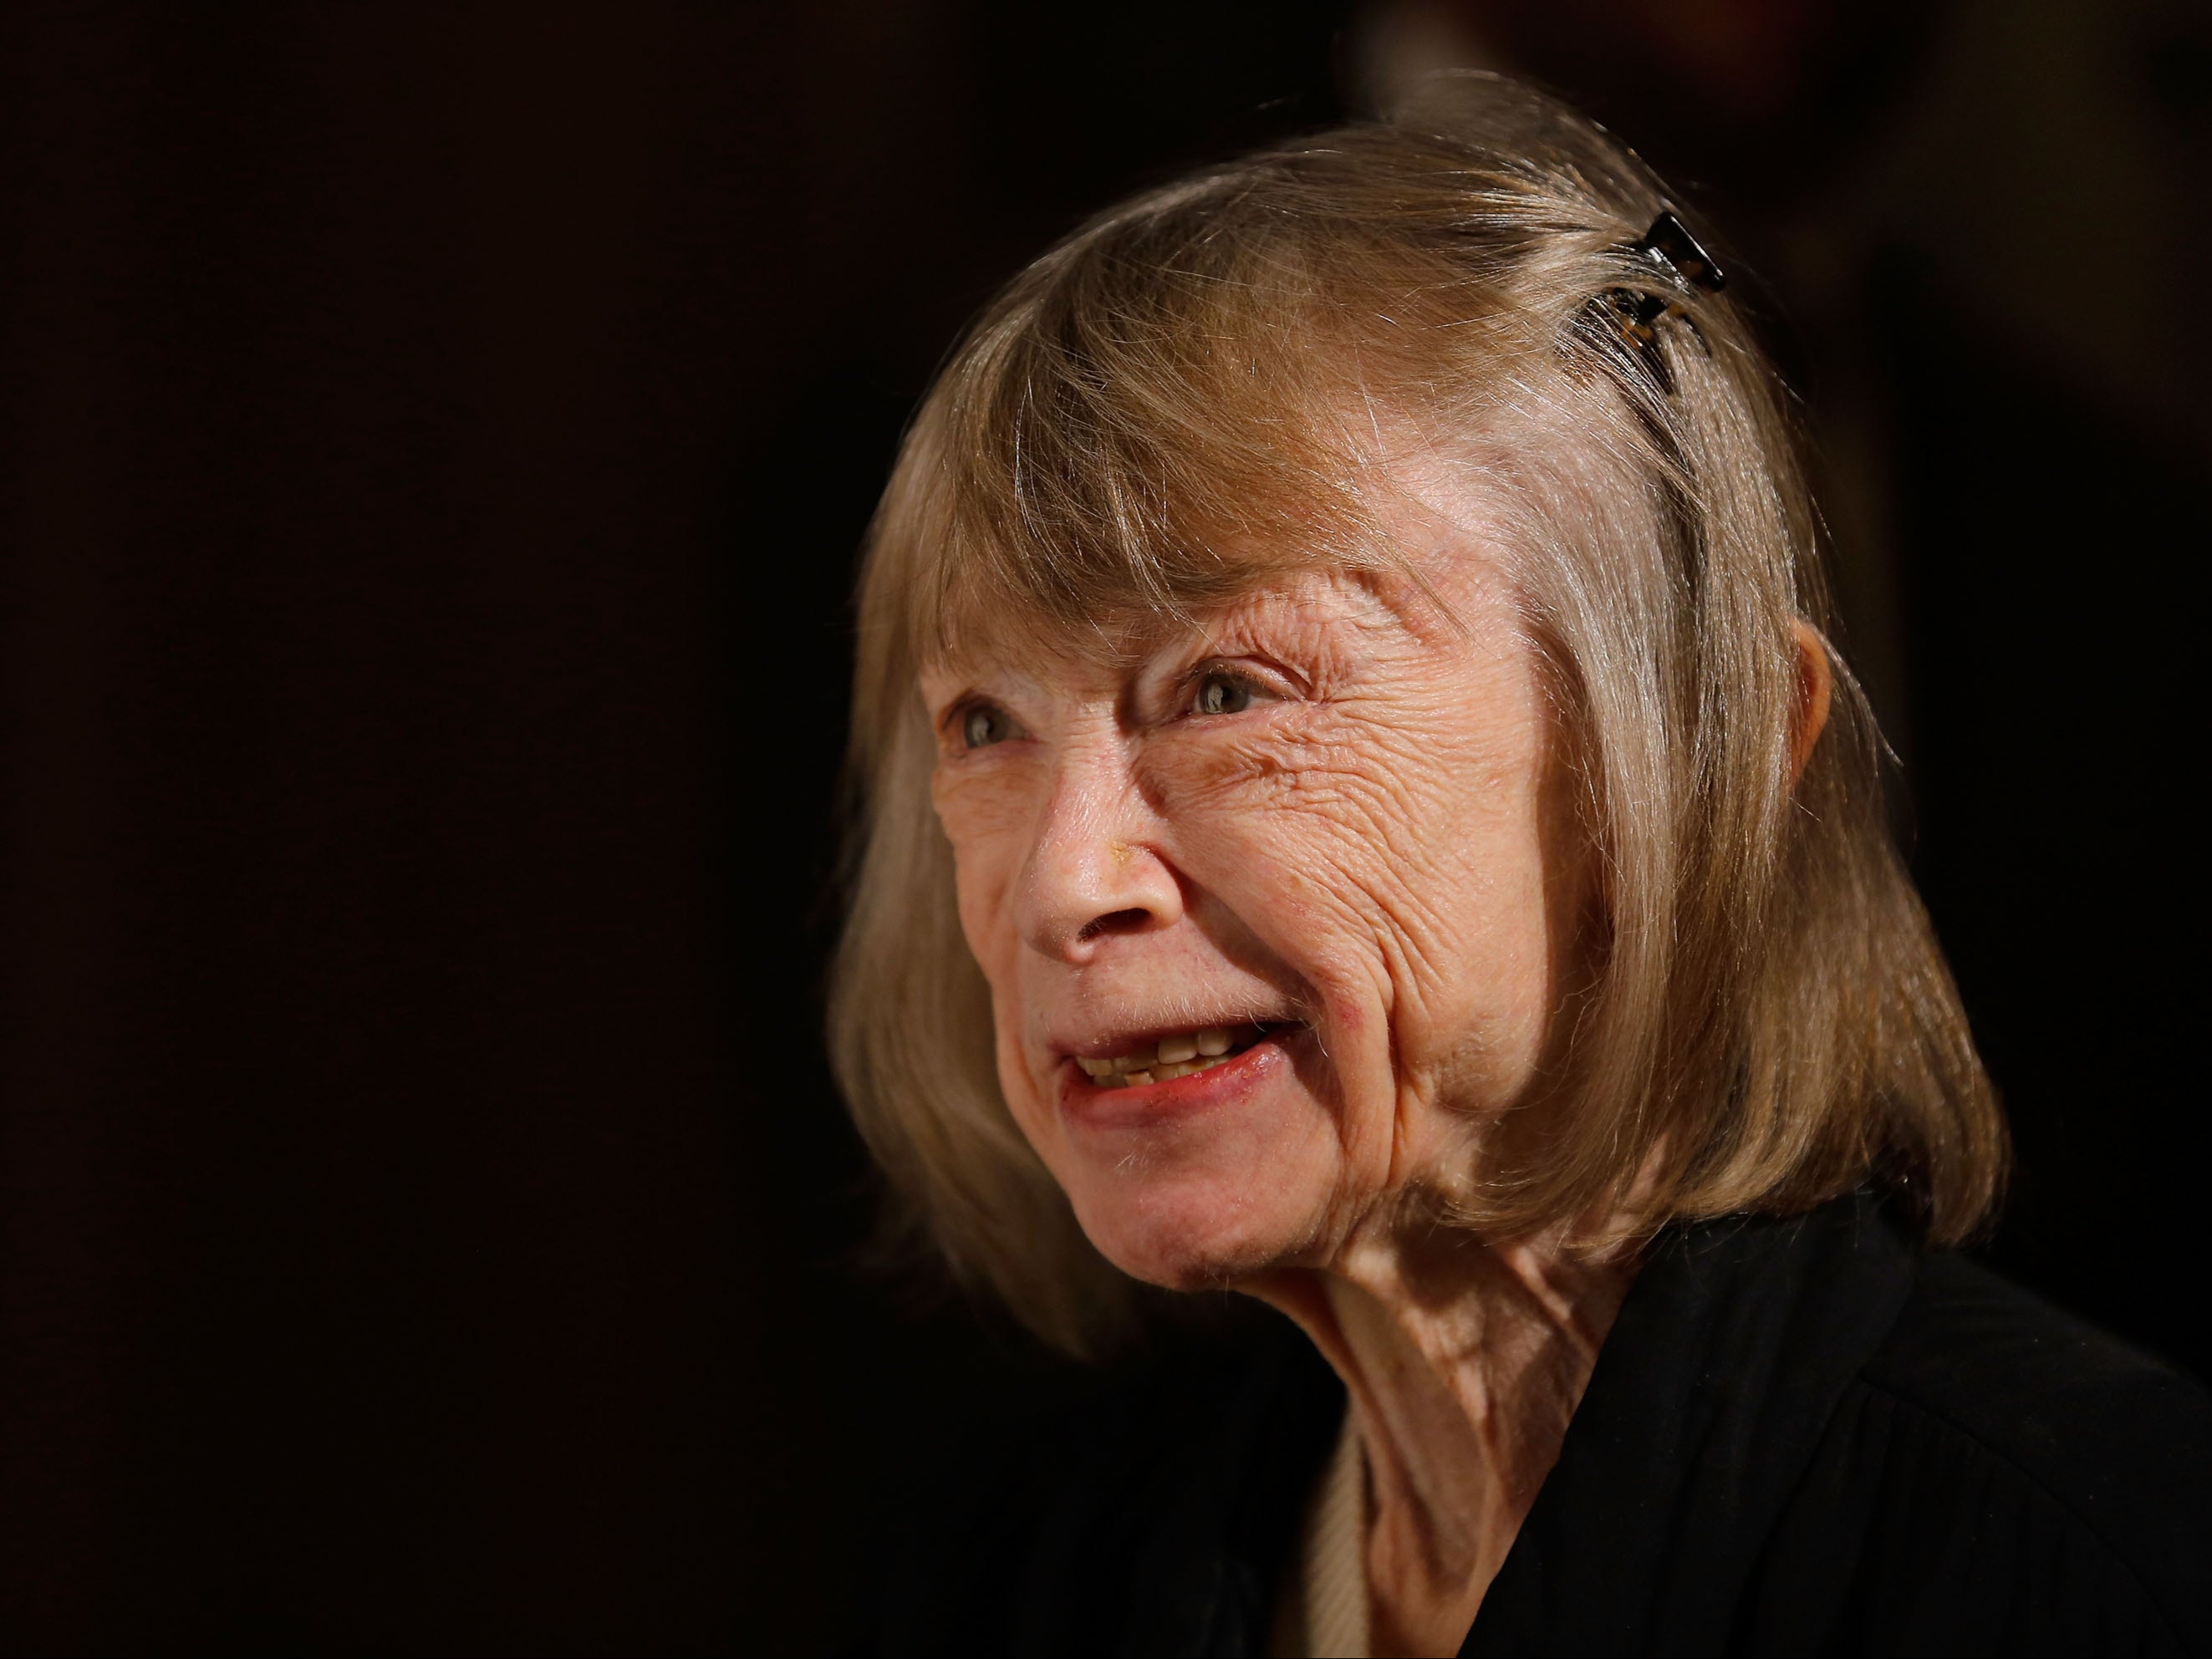 Tributes are being paid Joan Didion, literary giant